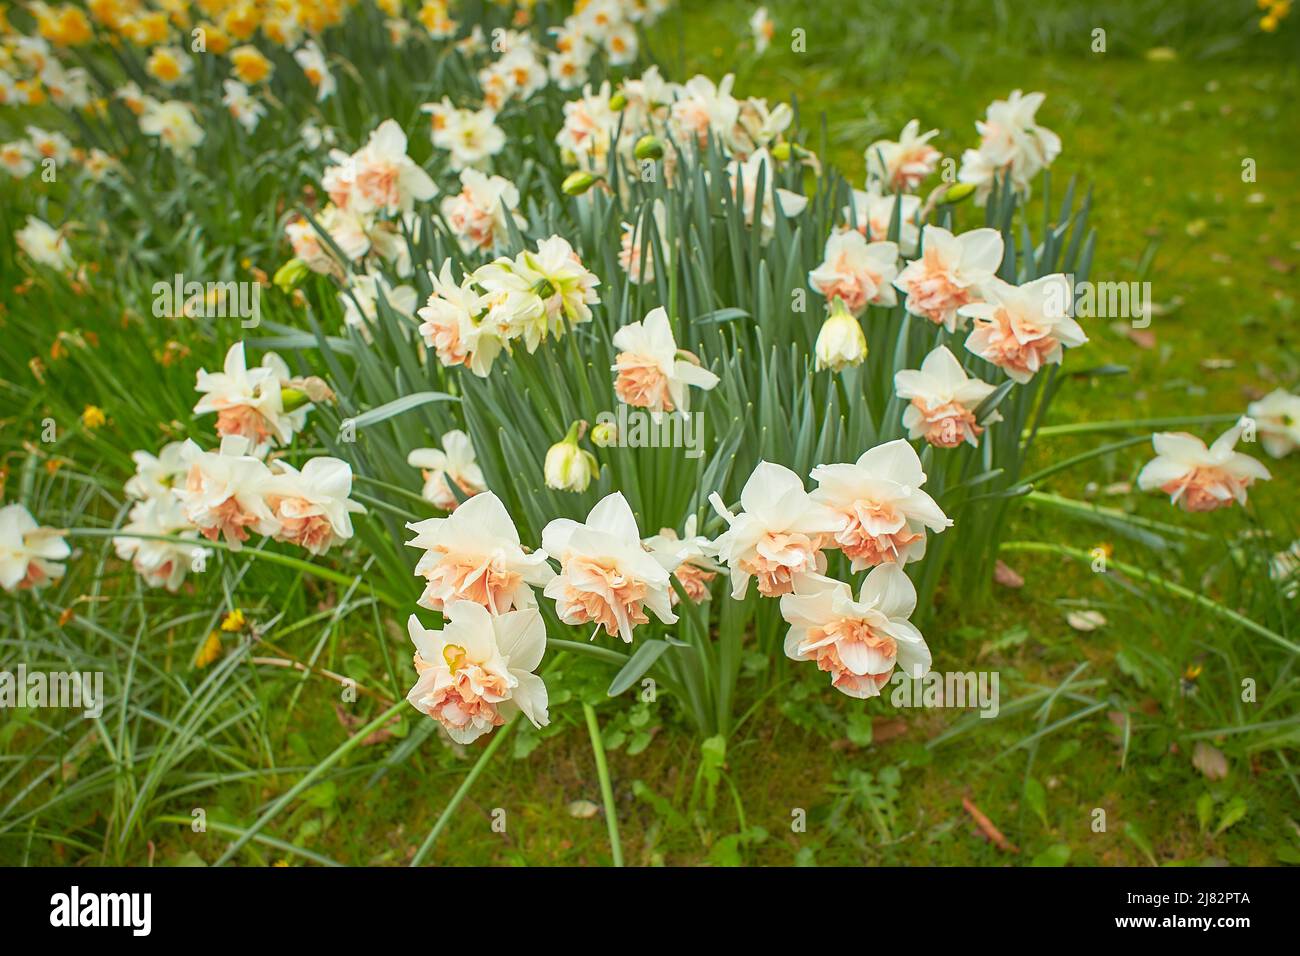 Vivid white, yellow tulips with variegated leaves bloom in a garden in a spring day, beautiful outdoor floral background photographed with soft focus. Stock Photo